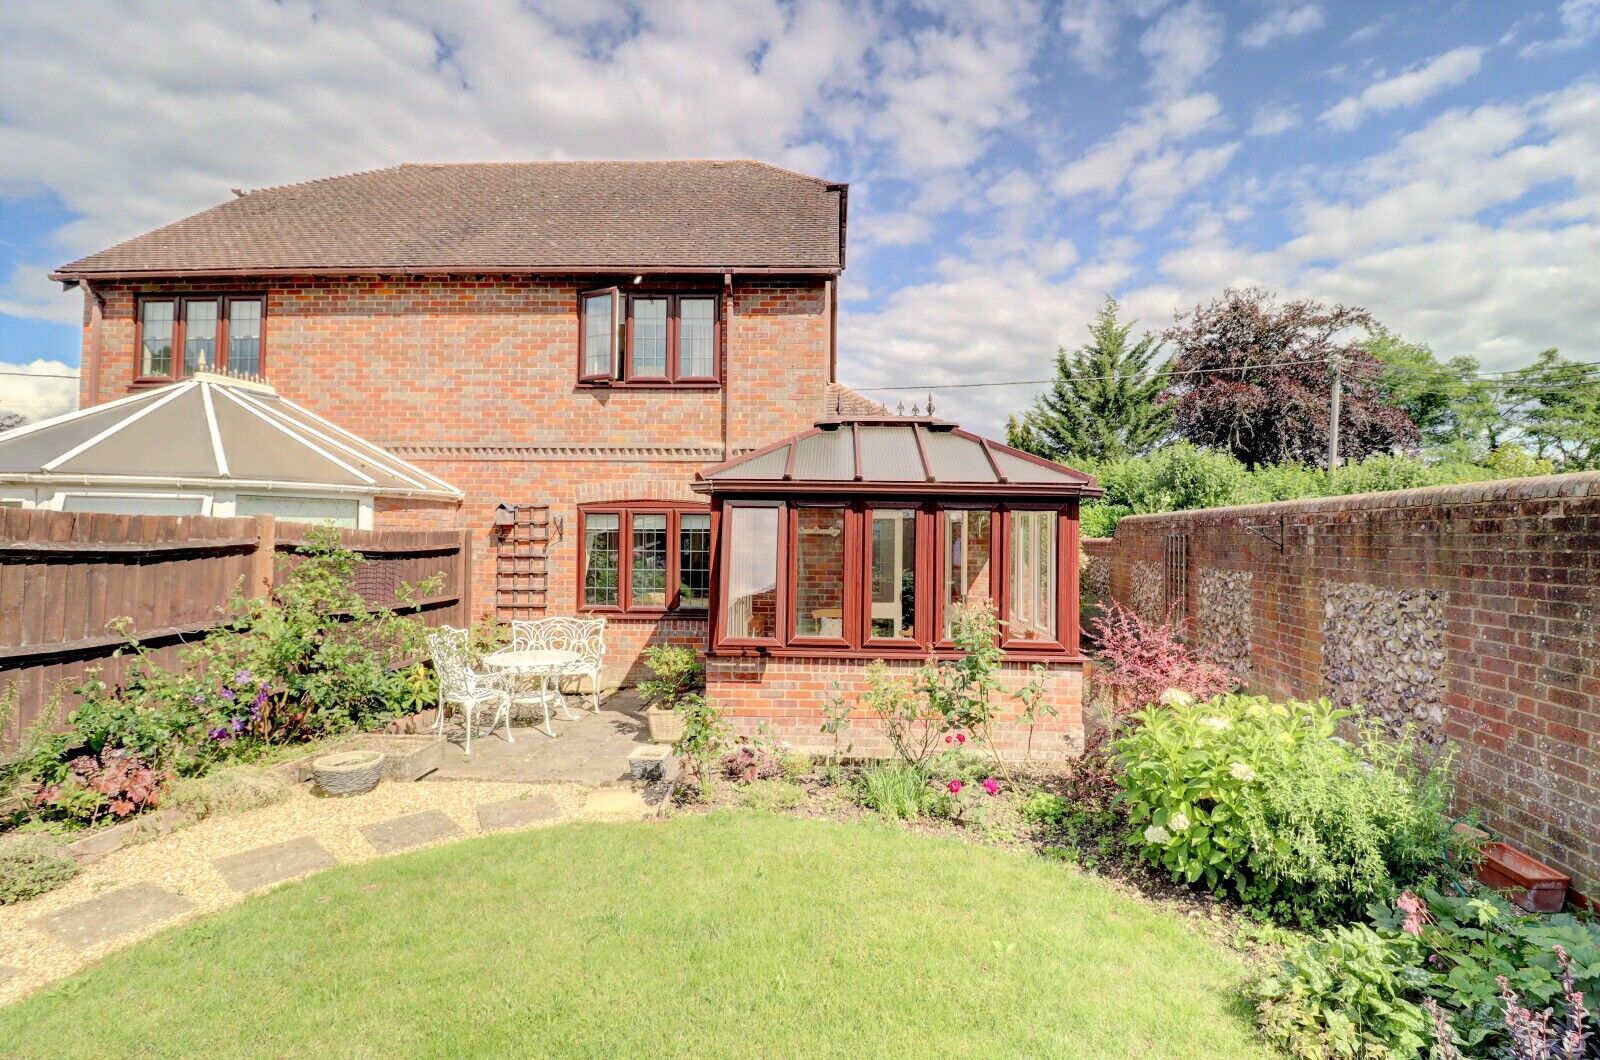 2 bedroom semi detached house for sale The Homestead, Missenden Road, HP15, main image